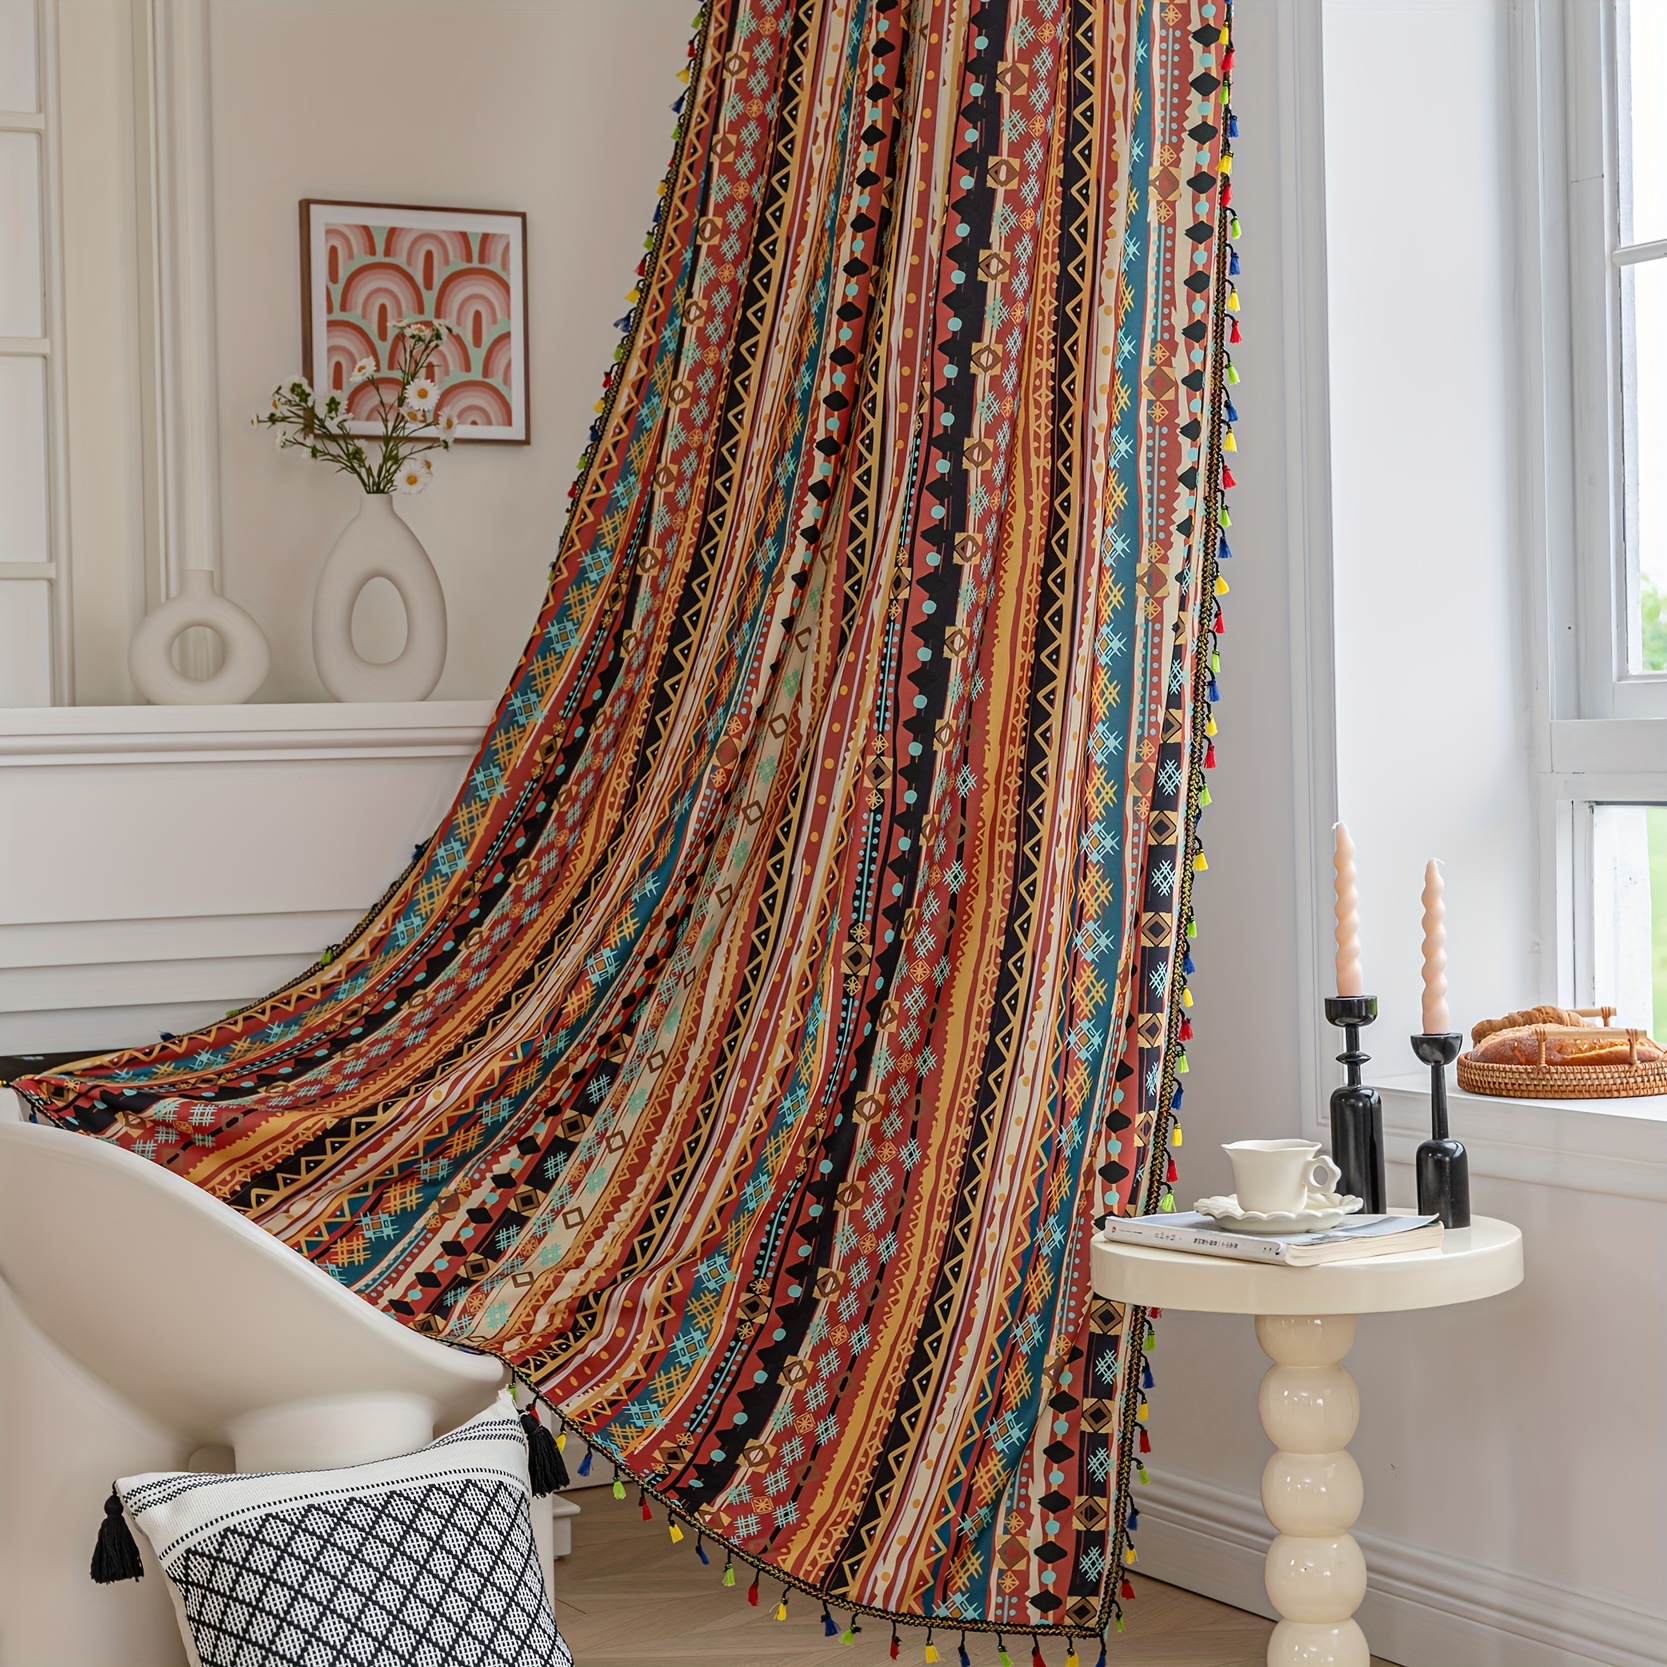 

2pcs Farmhouse Multicolor Boho Curtains Chic Colorful Striped Tassels Curtain Sunshade Anti-spy Privacy Protection Curtains For Bedroom Indoor Living Room Restaurant Bar Party Playroom Dorm Home Decor